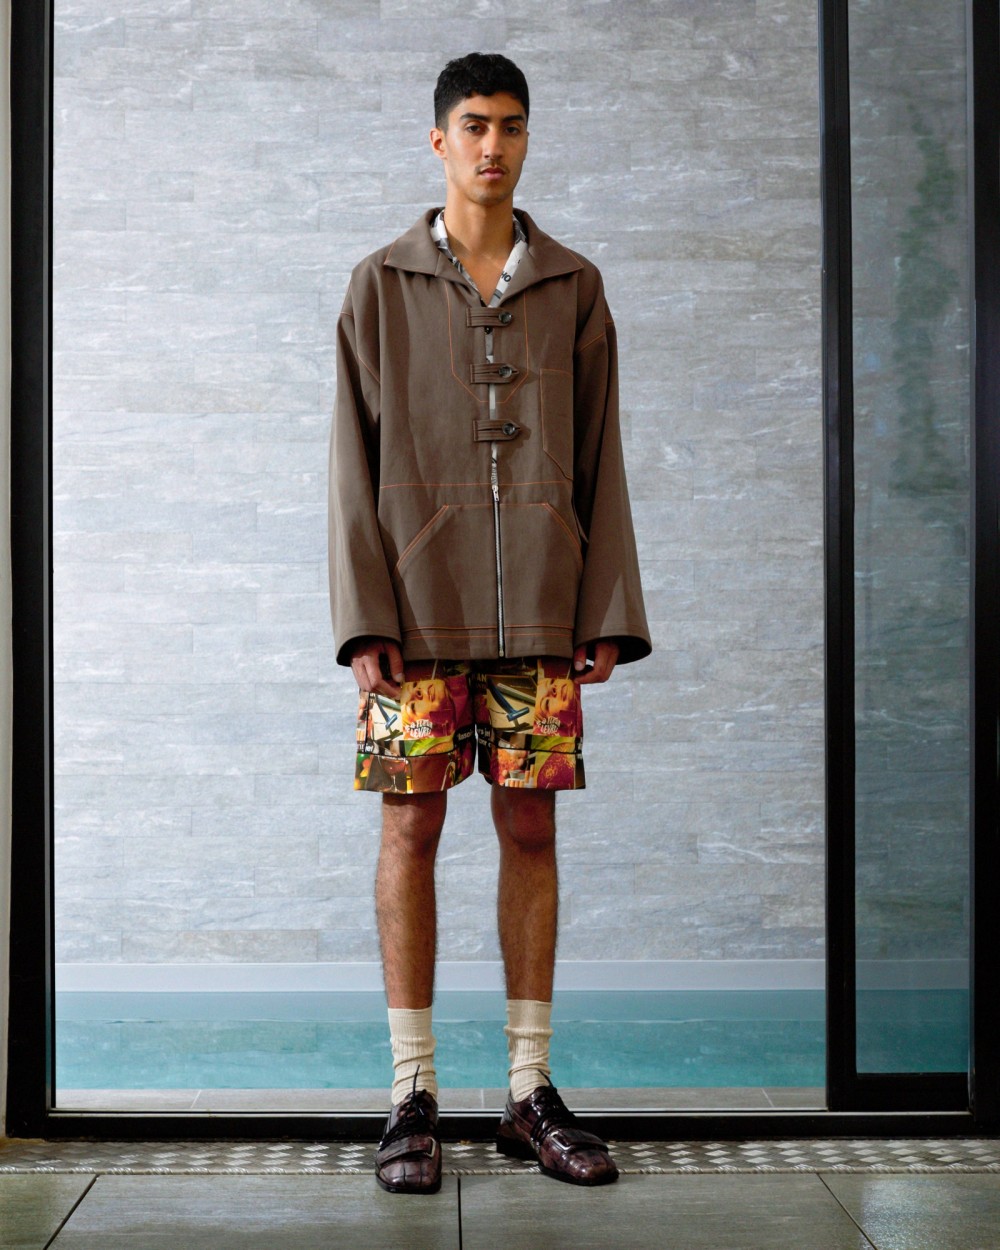 6 Emerging Designers to Know From Mens Fashion Week